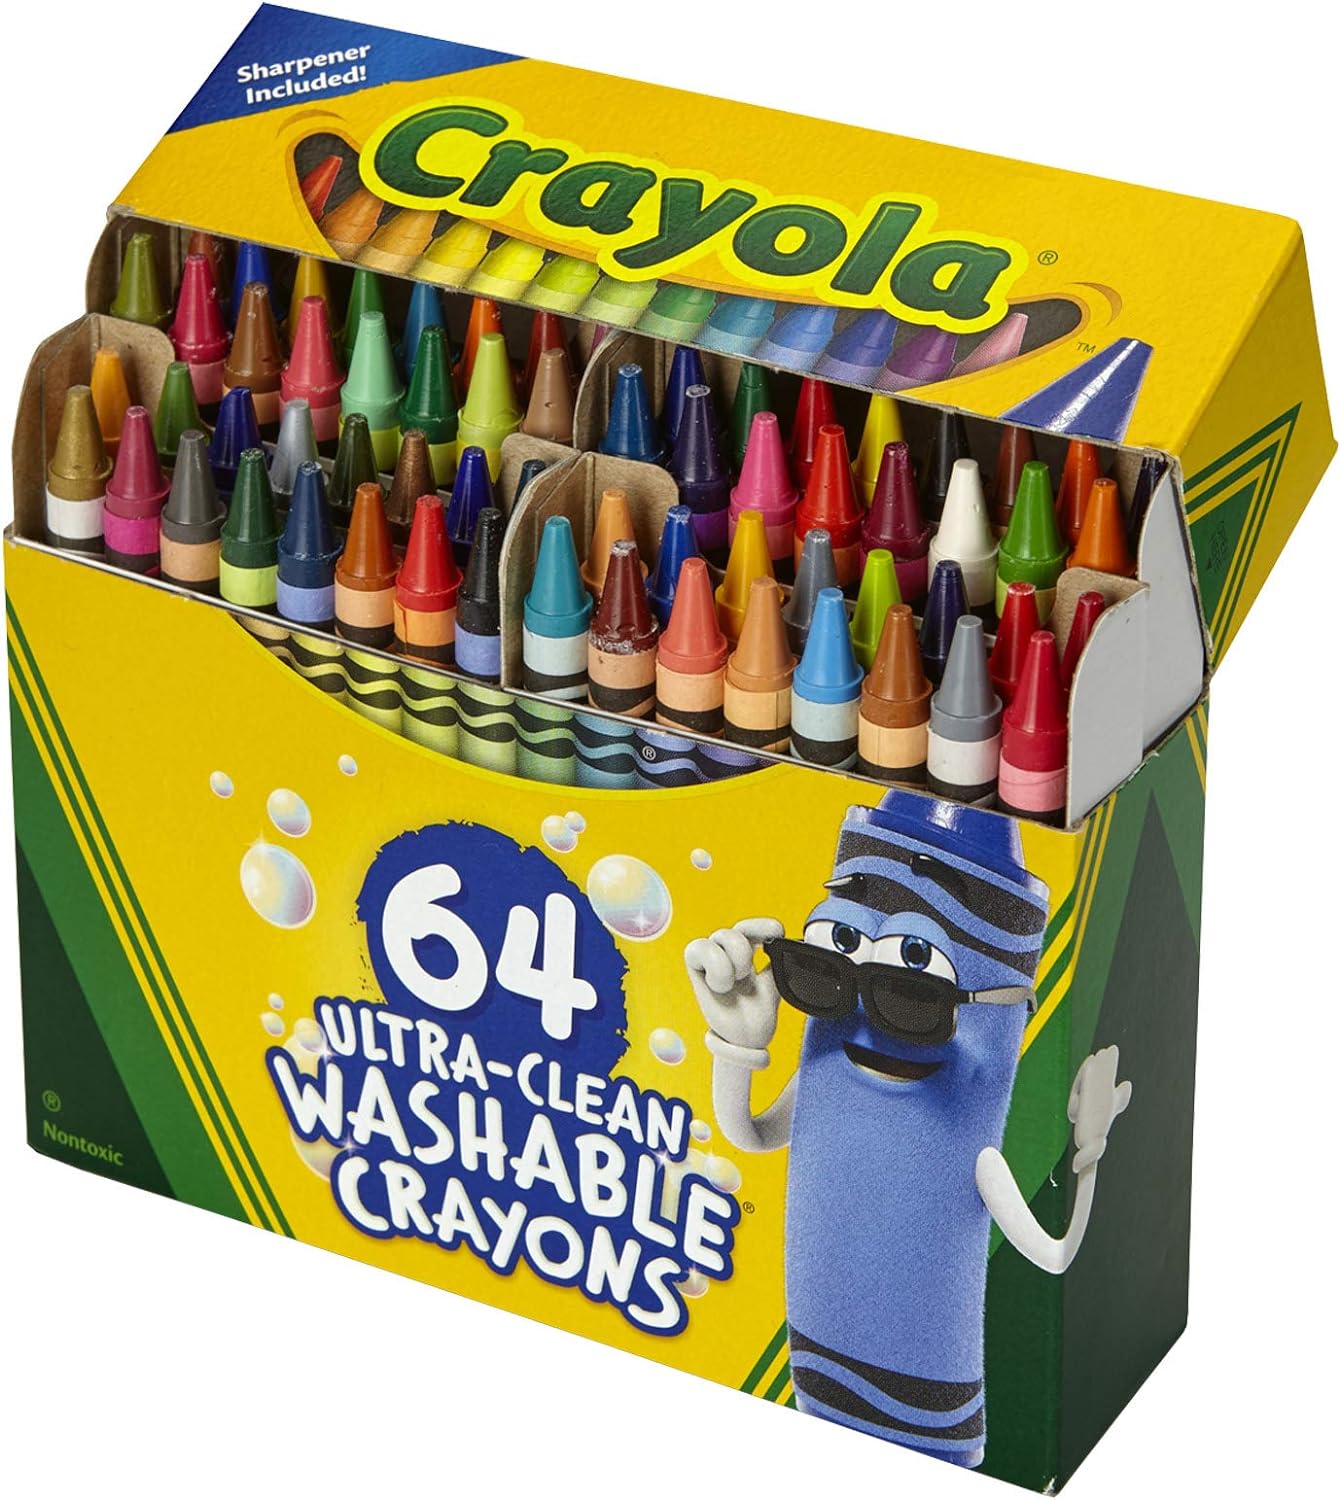 Crayola Ultra Clean Washable Crayons, Built In Sharpener, 64 Count, Kids At  Home Activities